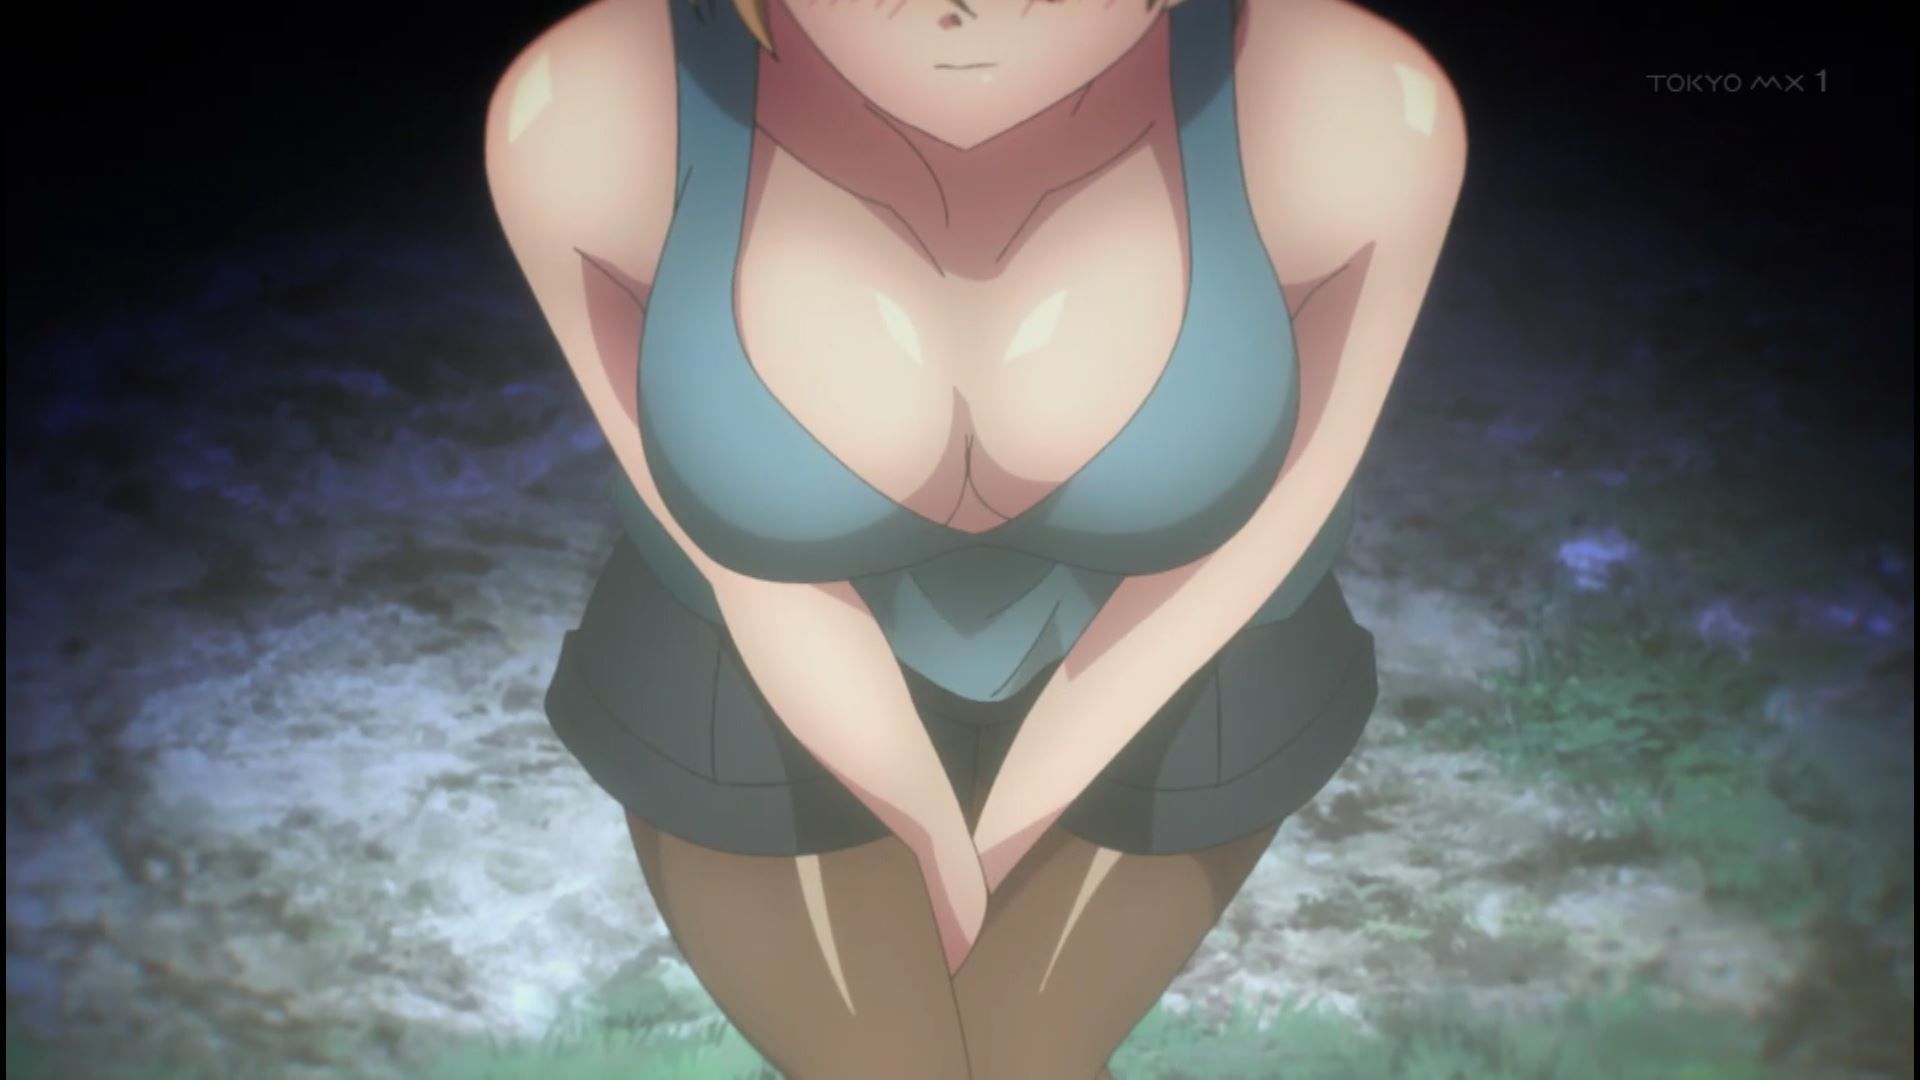 outdoors in episode 7 of the anime "Harem Kyampu!" And go straight to the ecchi scene! 3